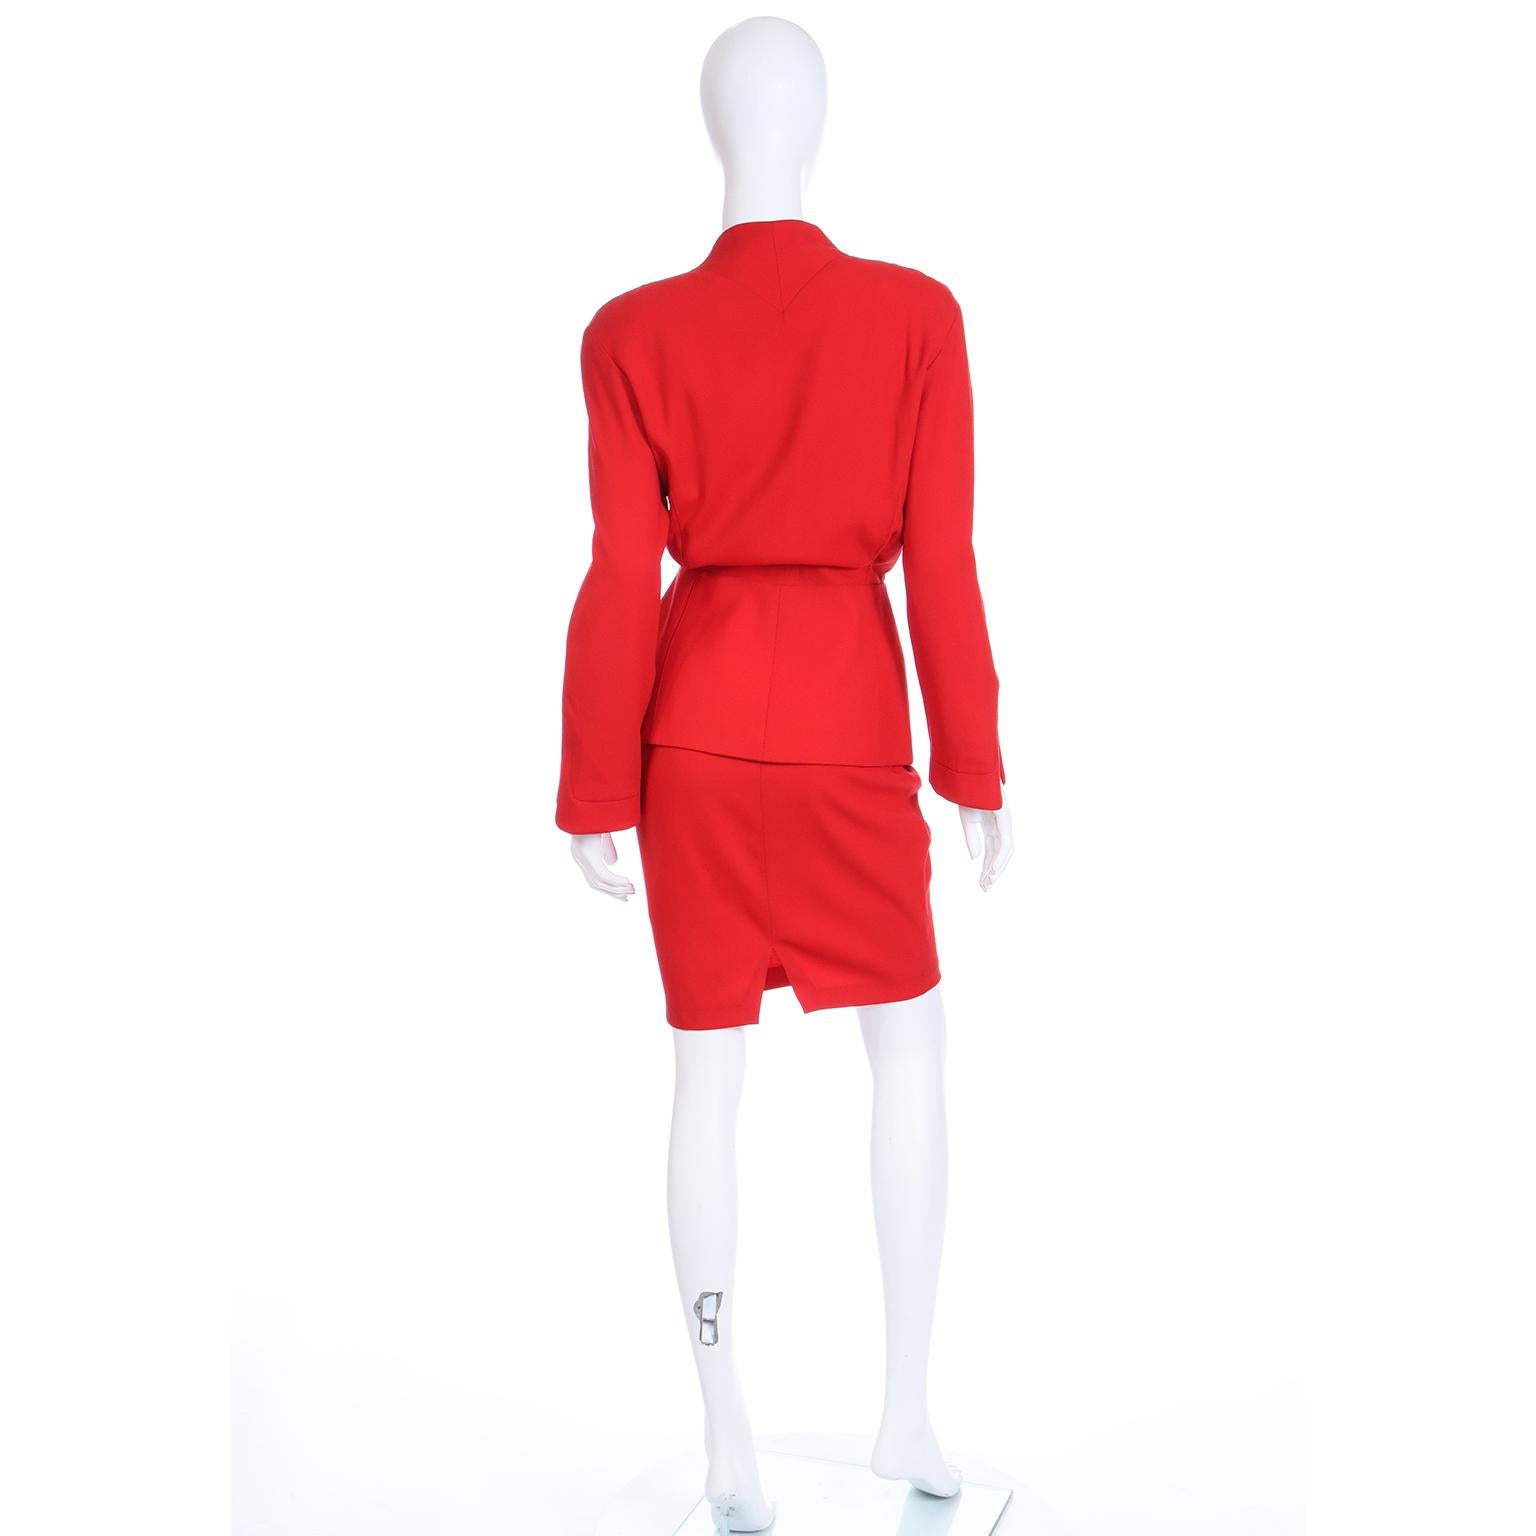 Women's Vintage Red Thierry Mugler Jacket and Skirt Suit Deadstock w Tags